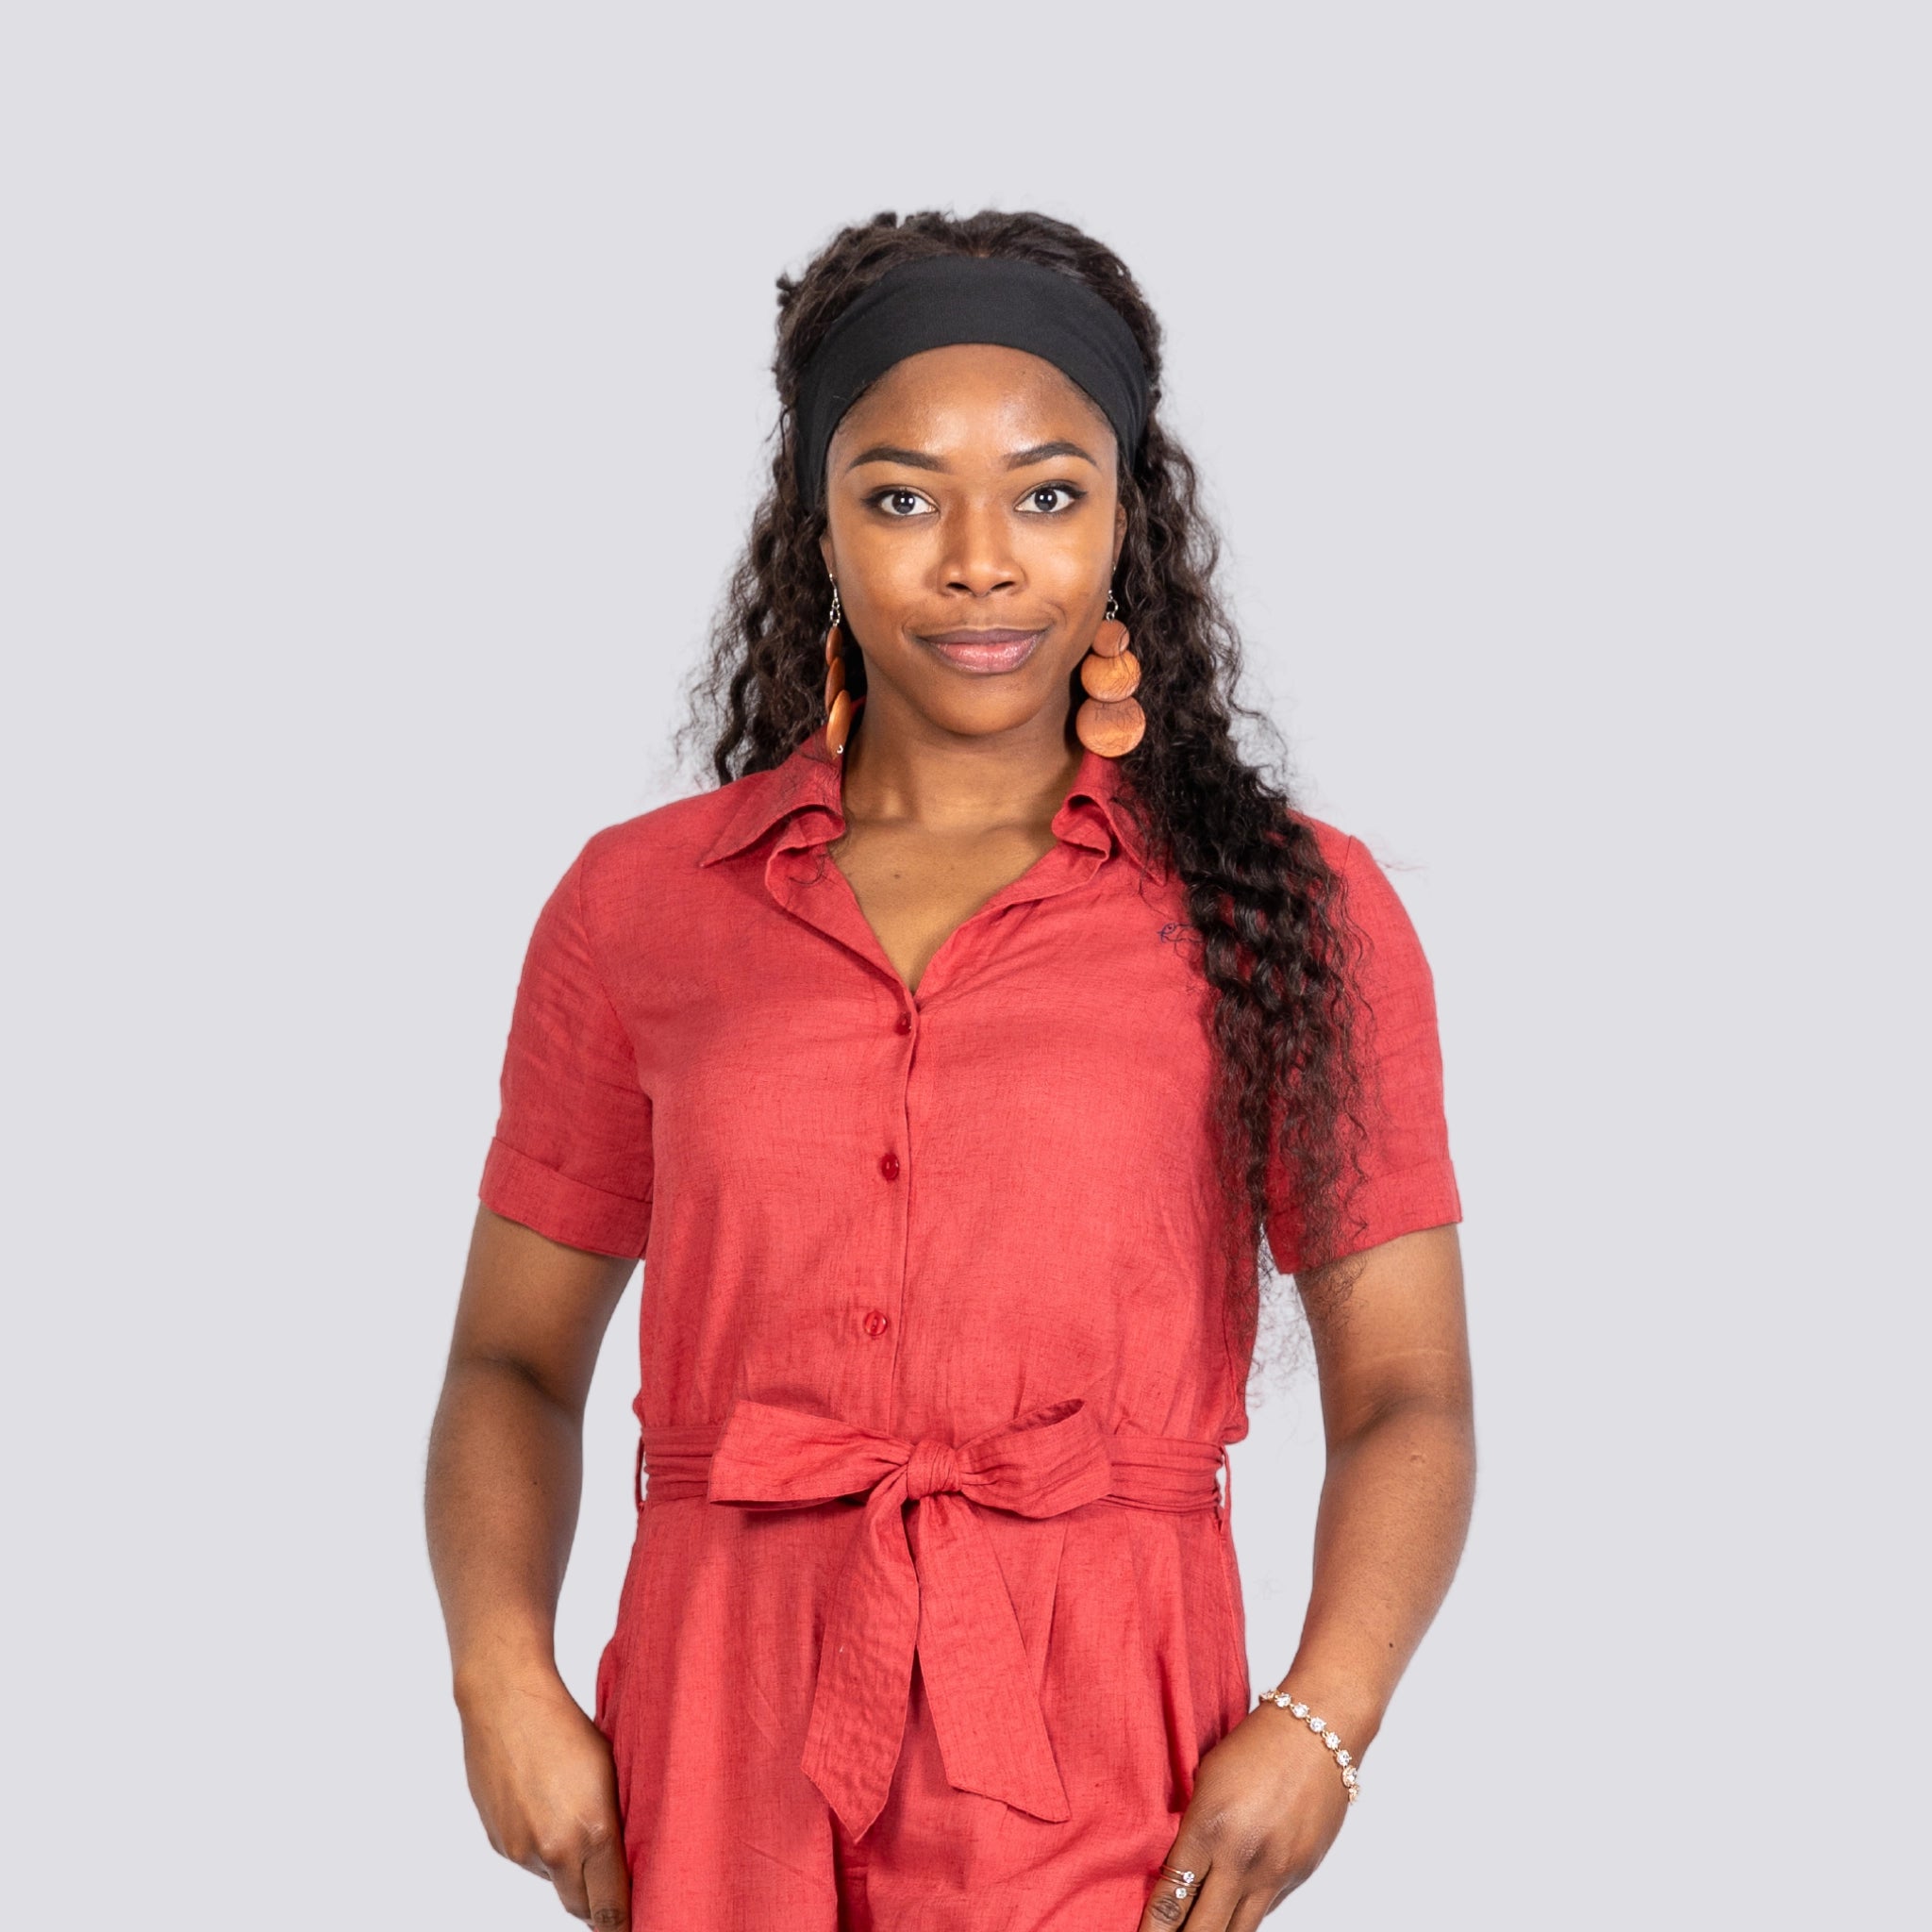 A woman wearing a Karee Milano Red Serenity Viscose Linen Jumpsuit and a headband stands facing the camera with a neutral expression.